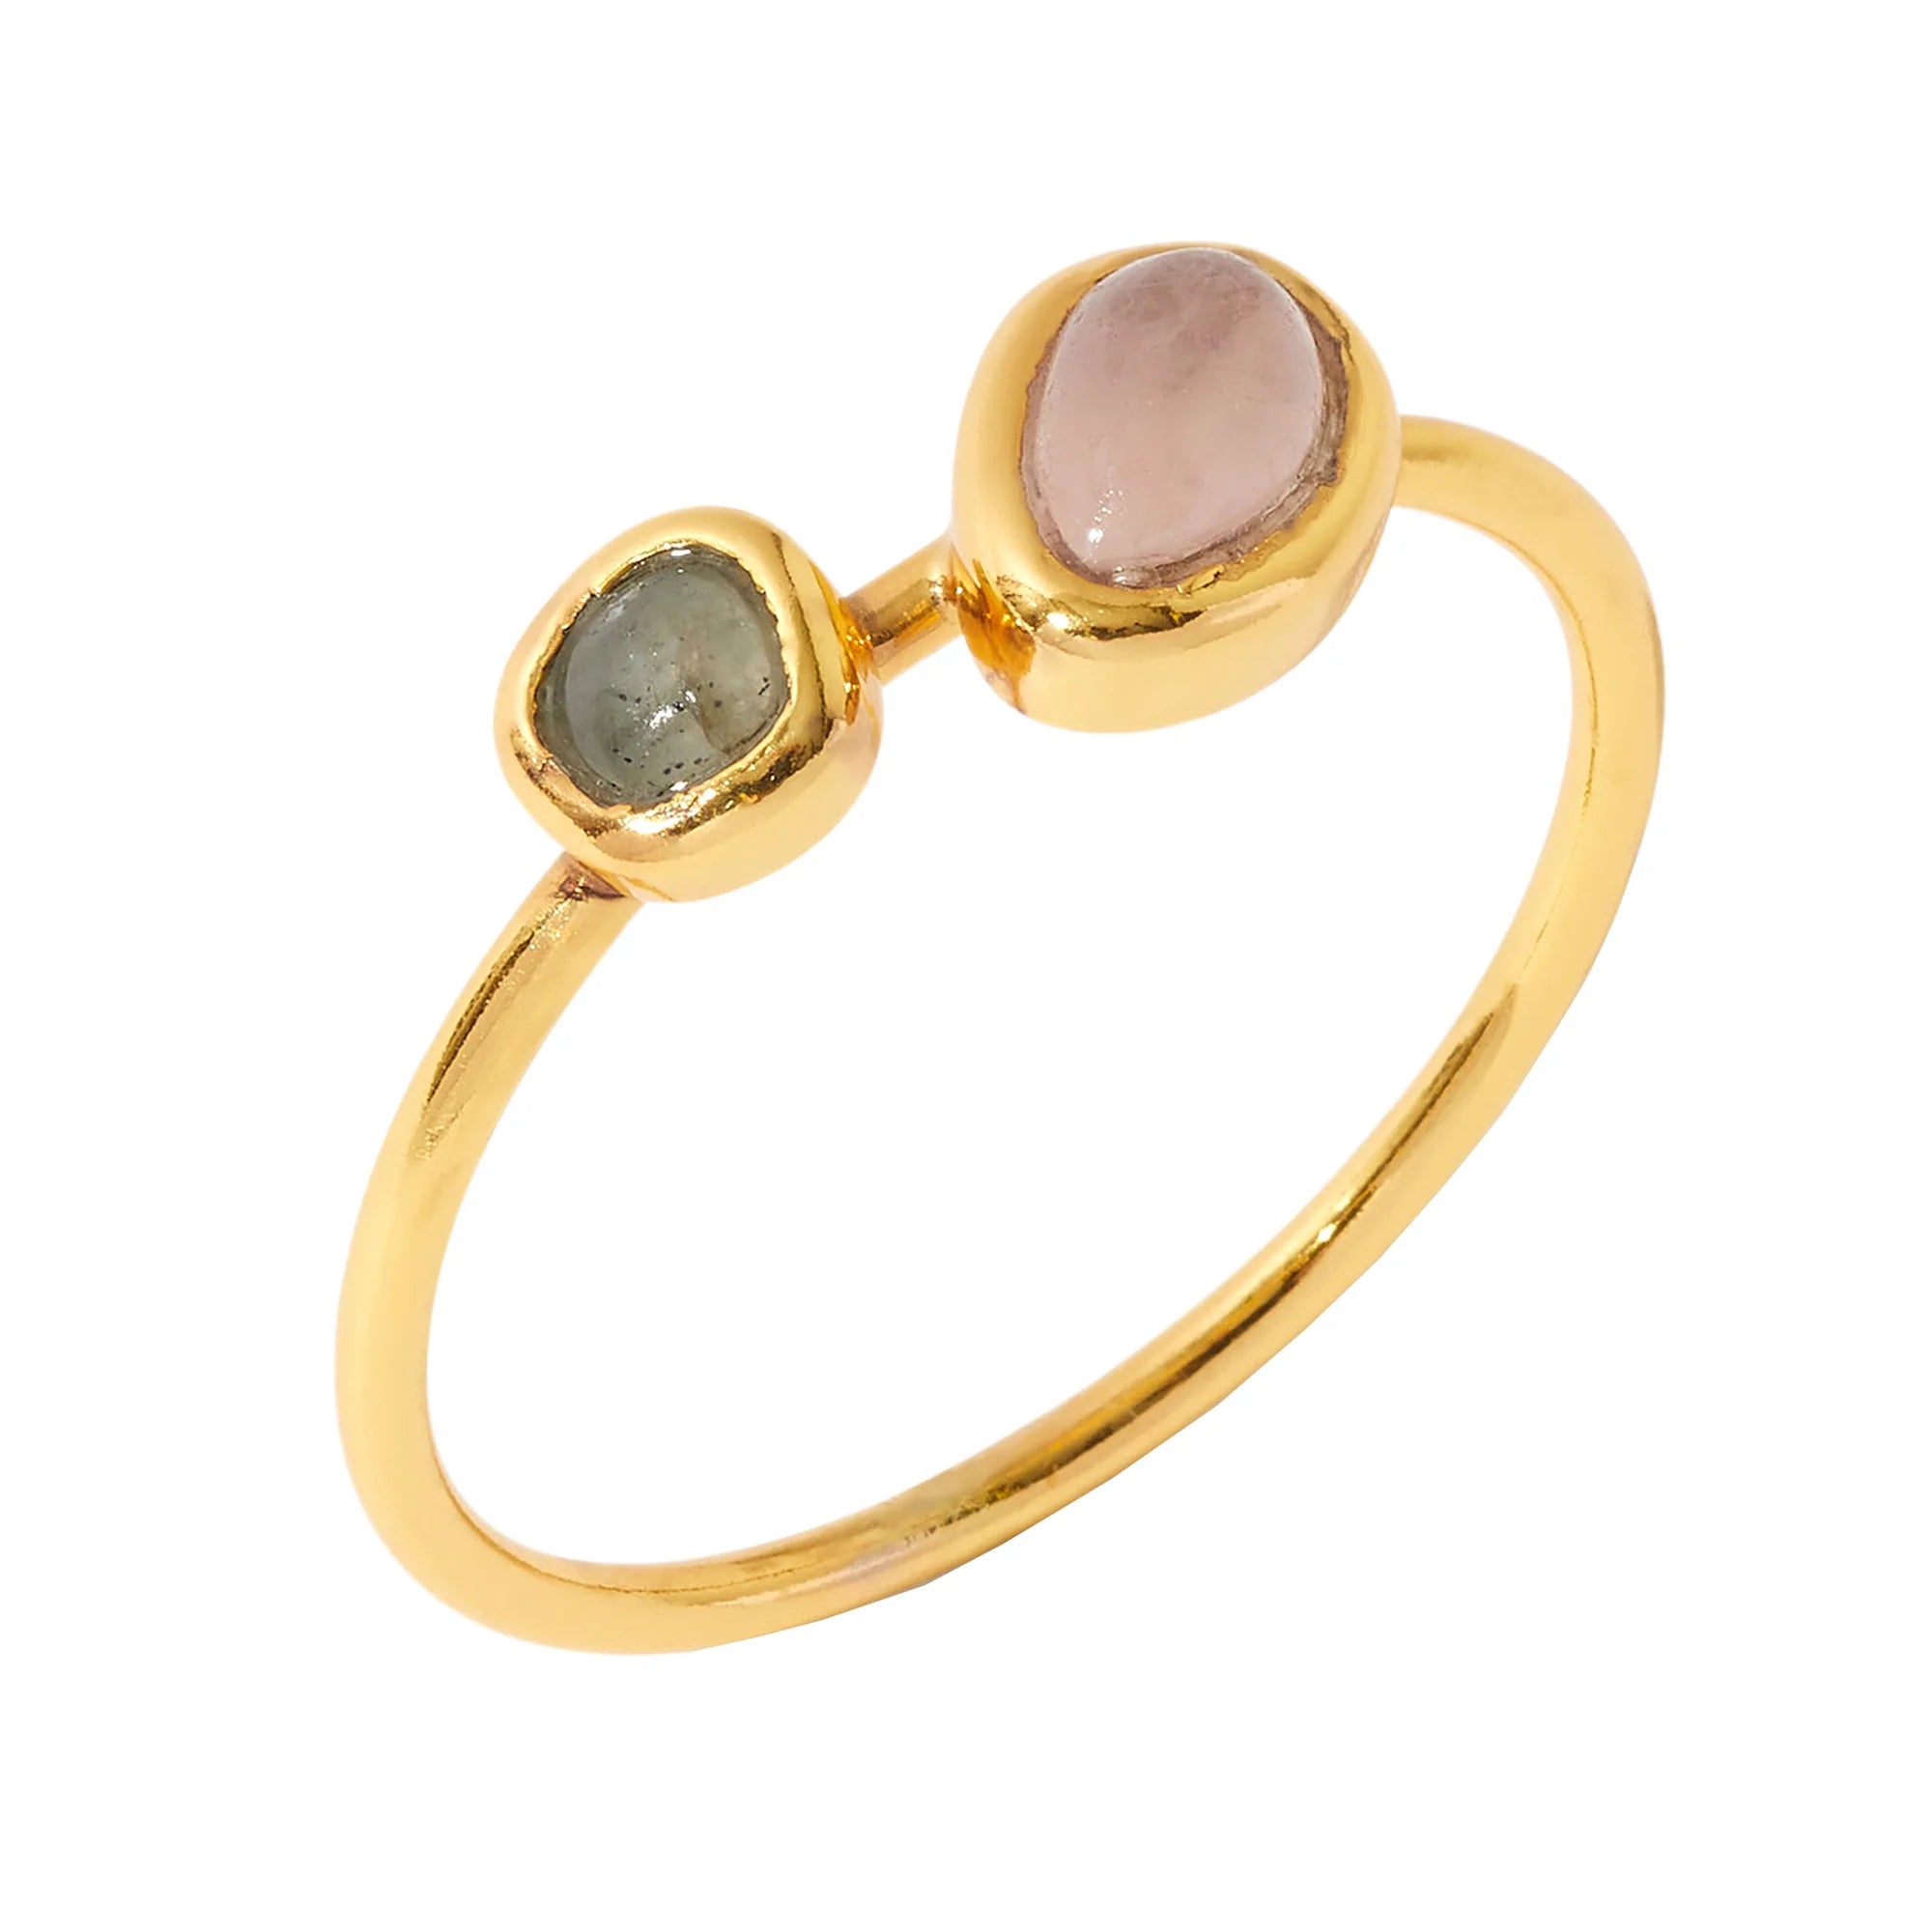 Real Gold Plated Z Healing Stone Ring For Women By Accessorize London-Small